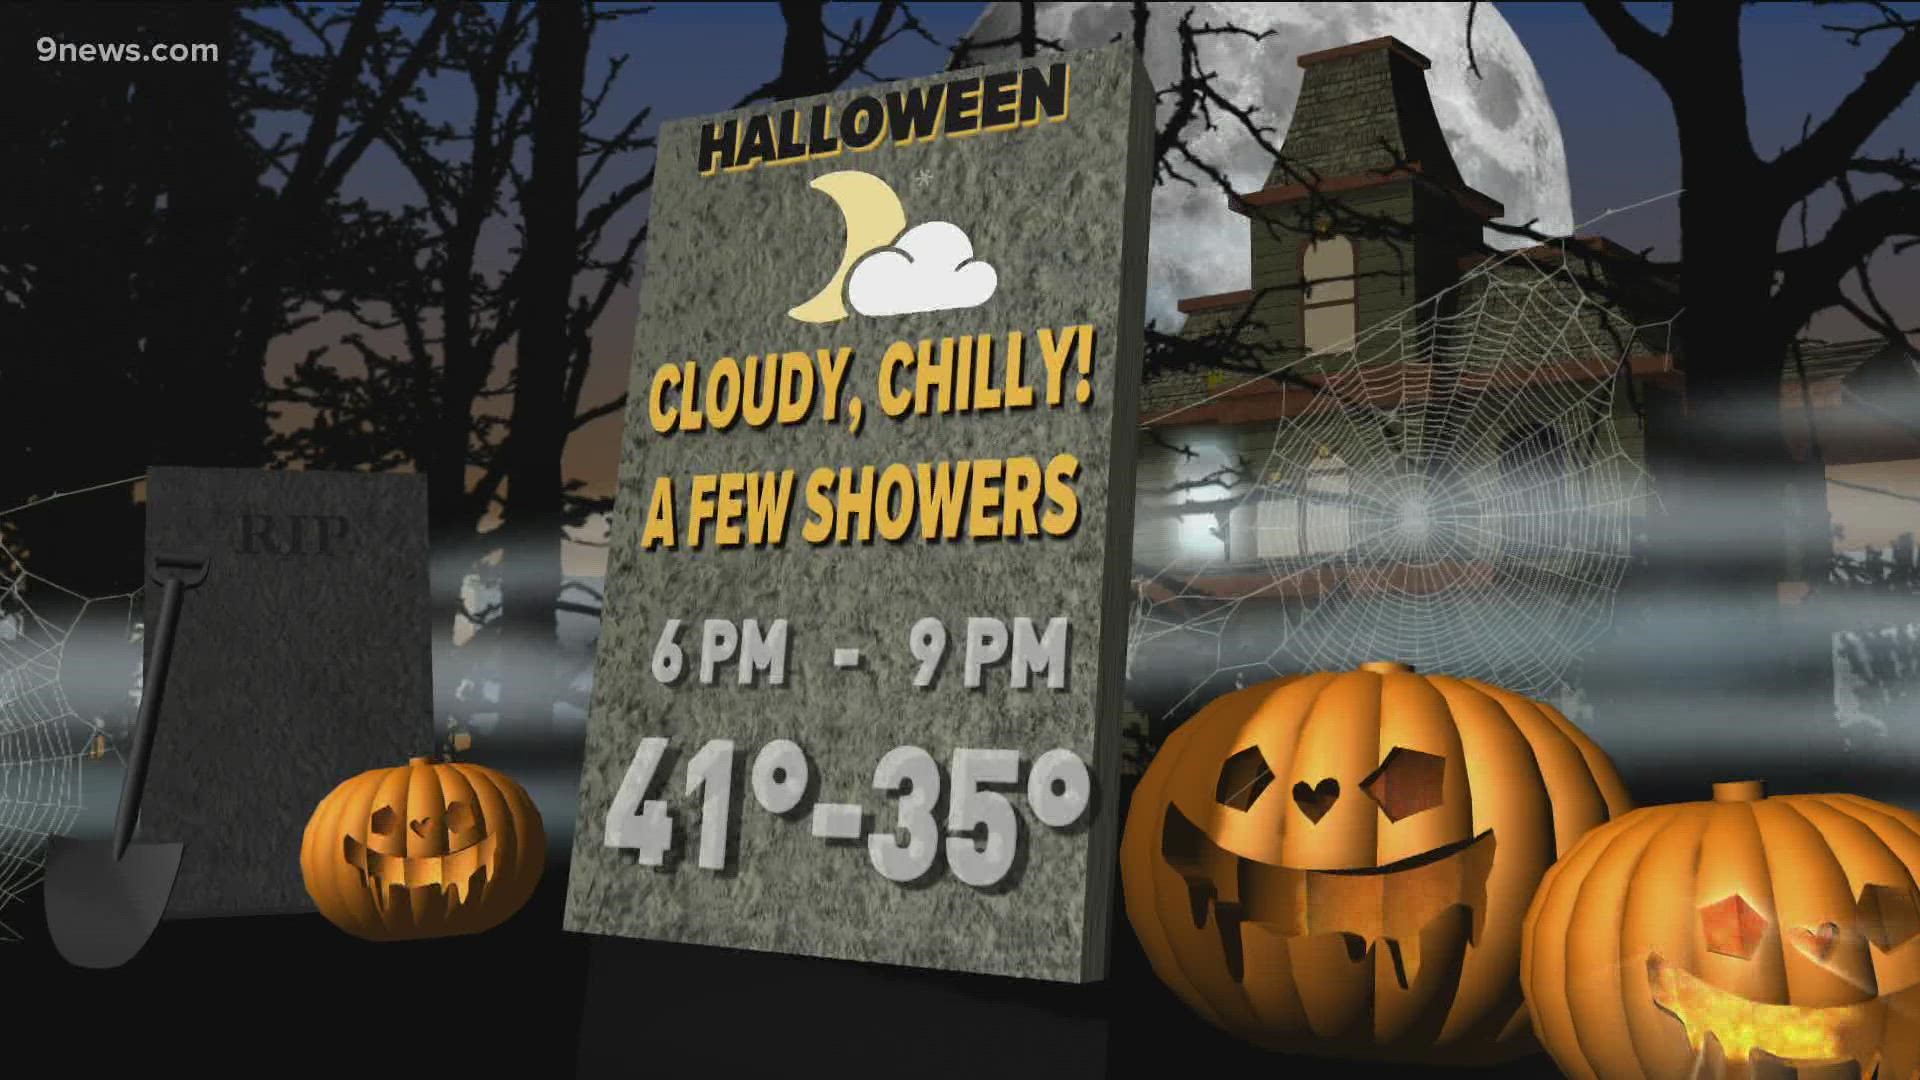 This is the Halloween forecast for October 31, 2021.